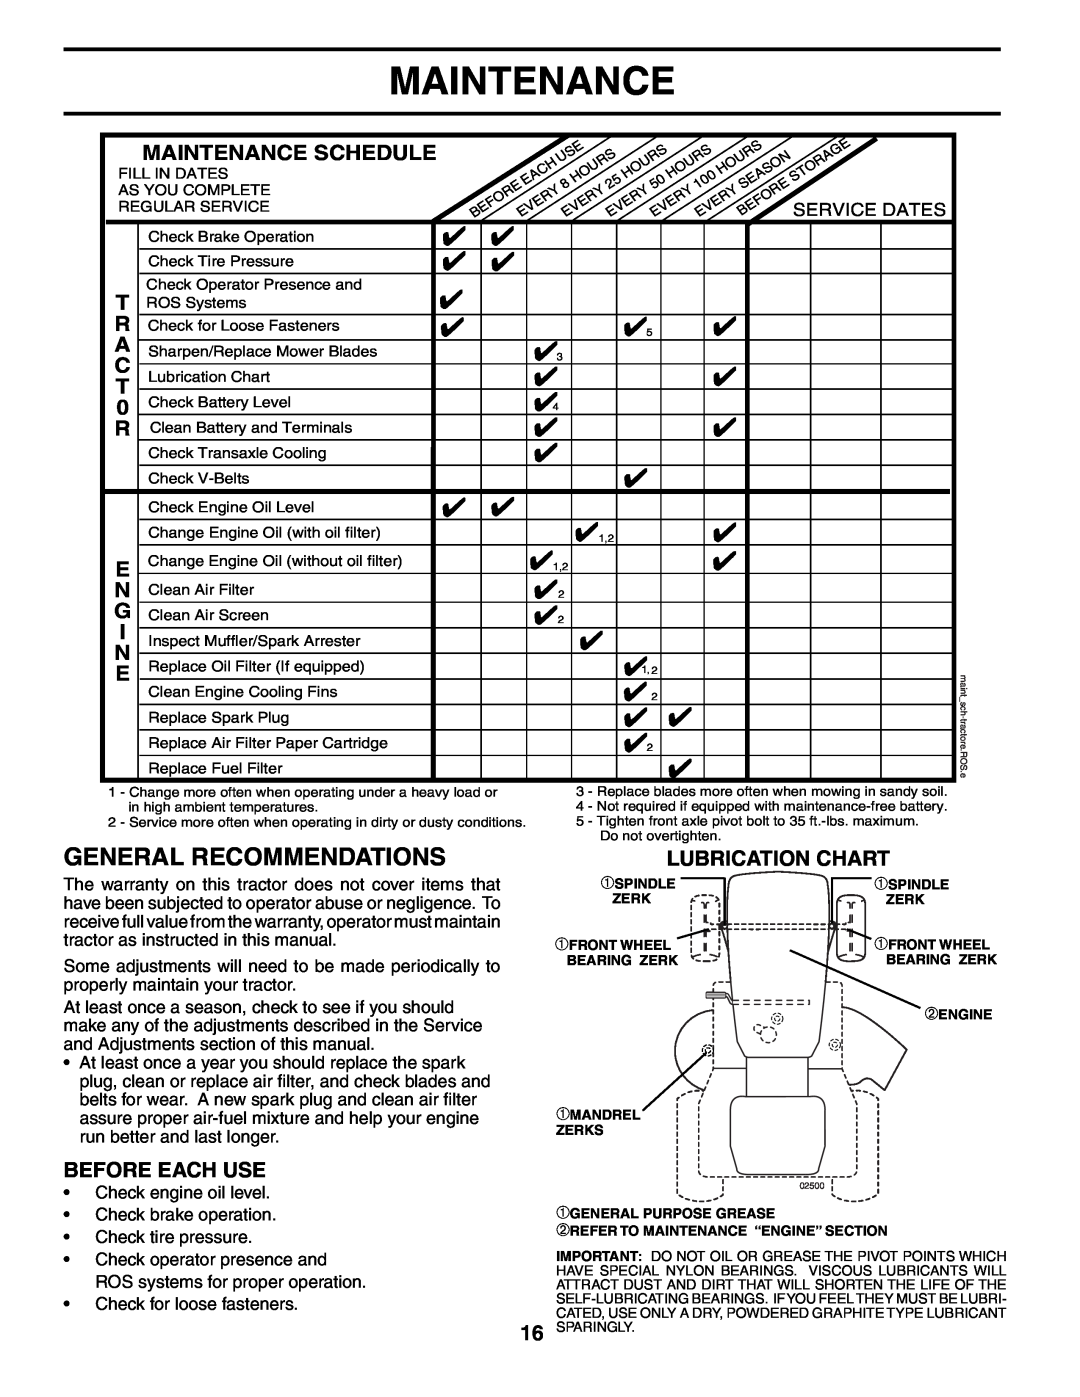 Poulan DB27H48YT manual General Recommendations, Lubrication Chart, Before Each Use, Maintenance Schedule 